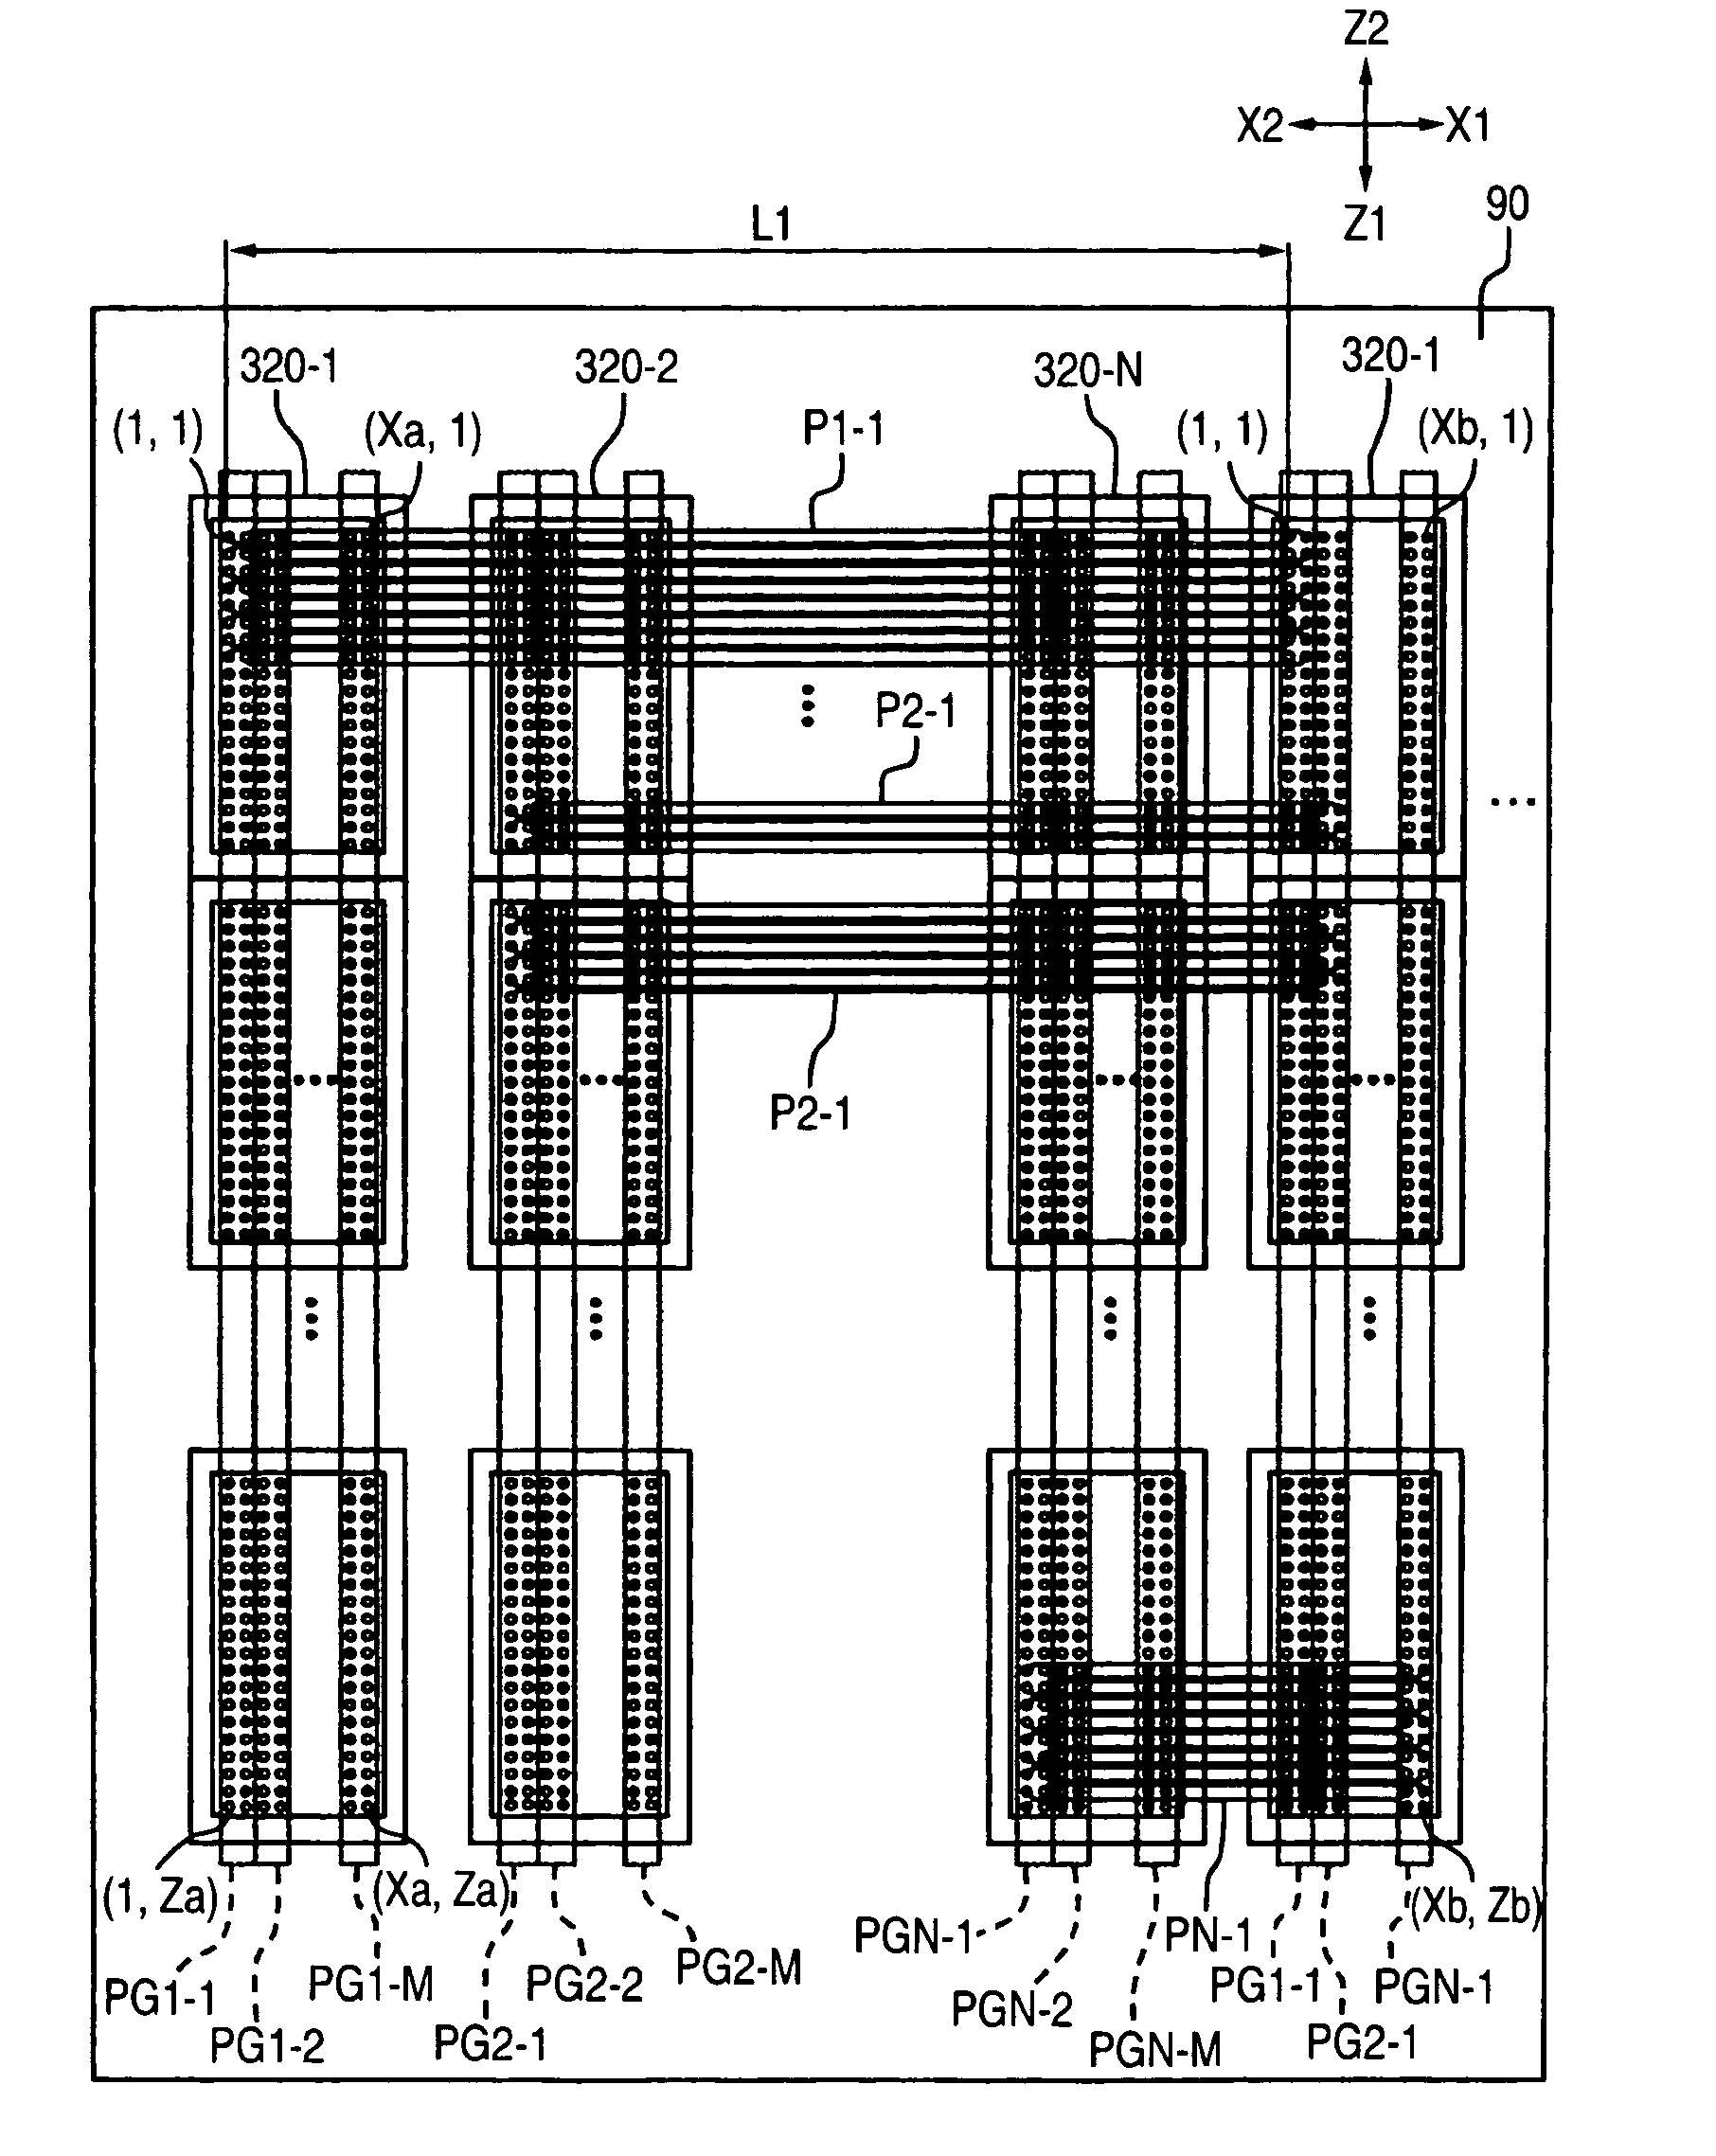 Fitting substrate for connection and fitting substrate for connection for use in disk array control apparatus